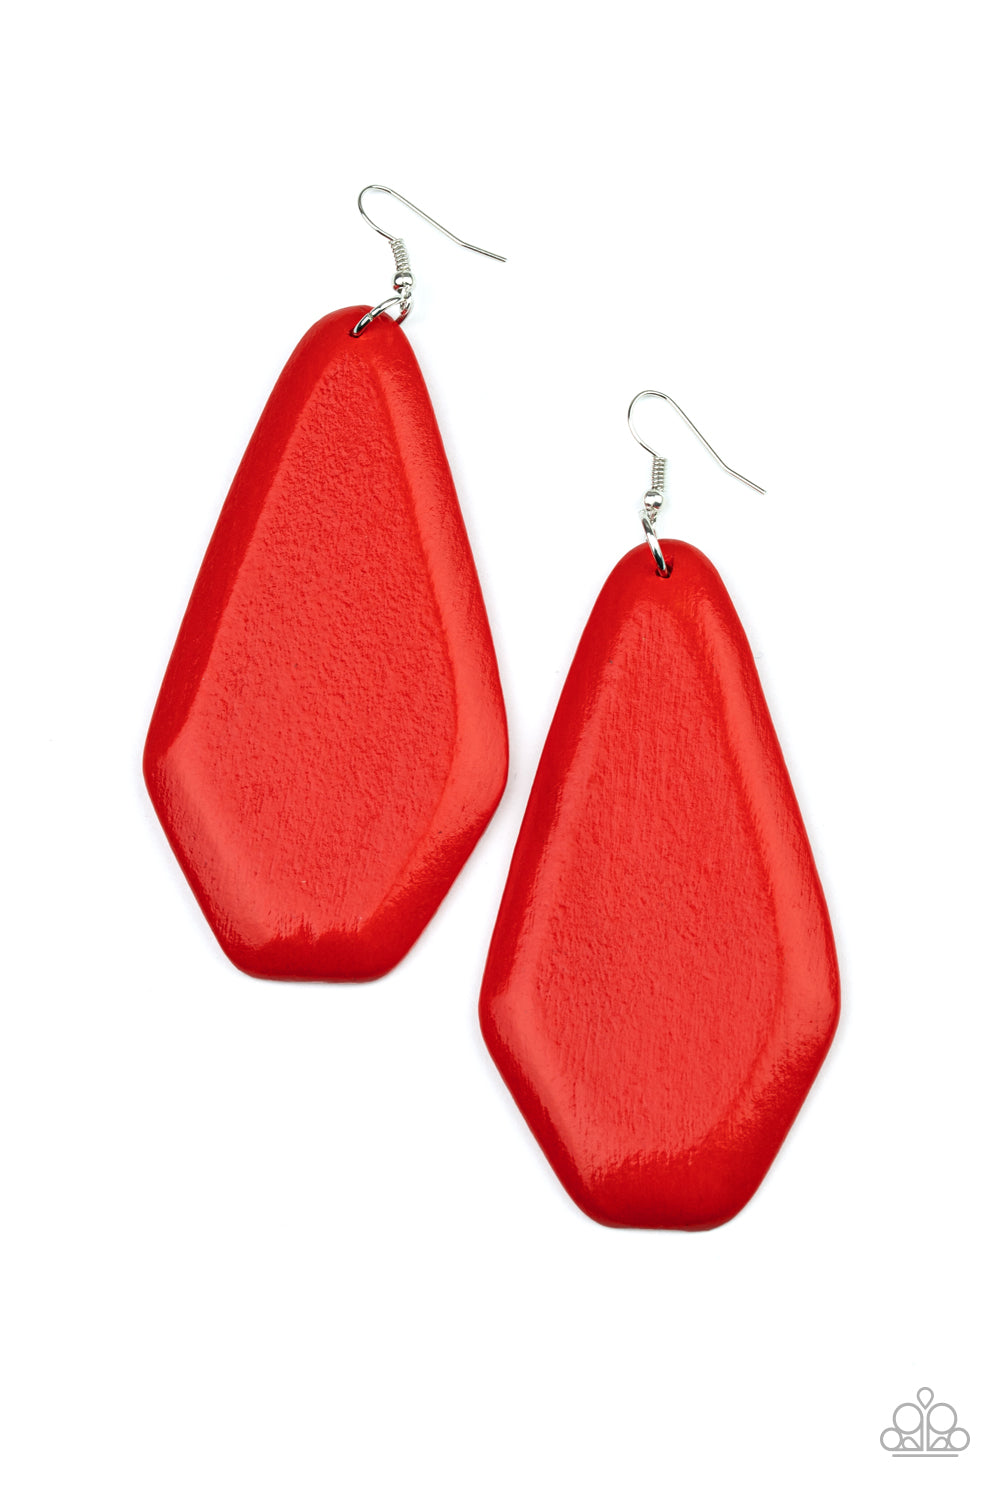 Paparazzi Vacation Ready - Red Earrings - paparazzi jewelry images